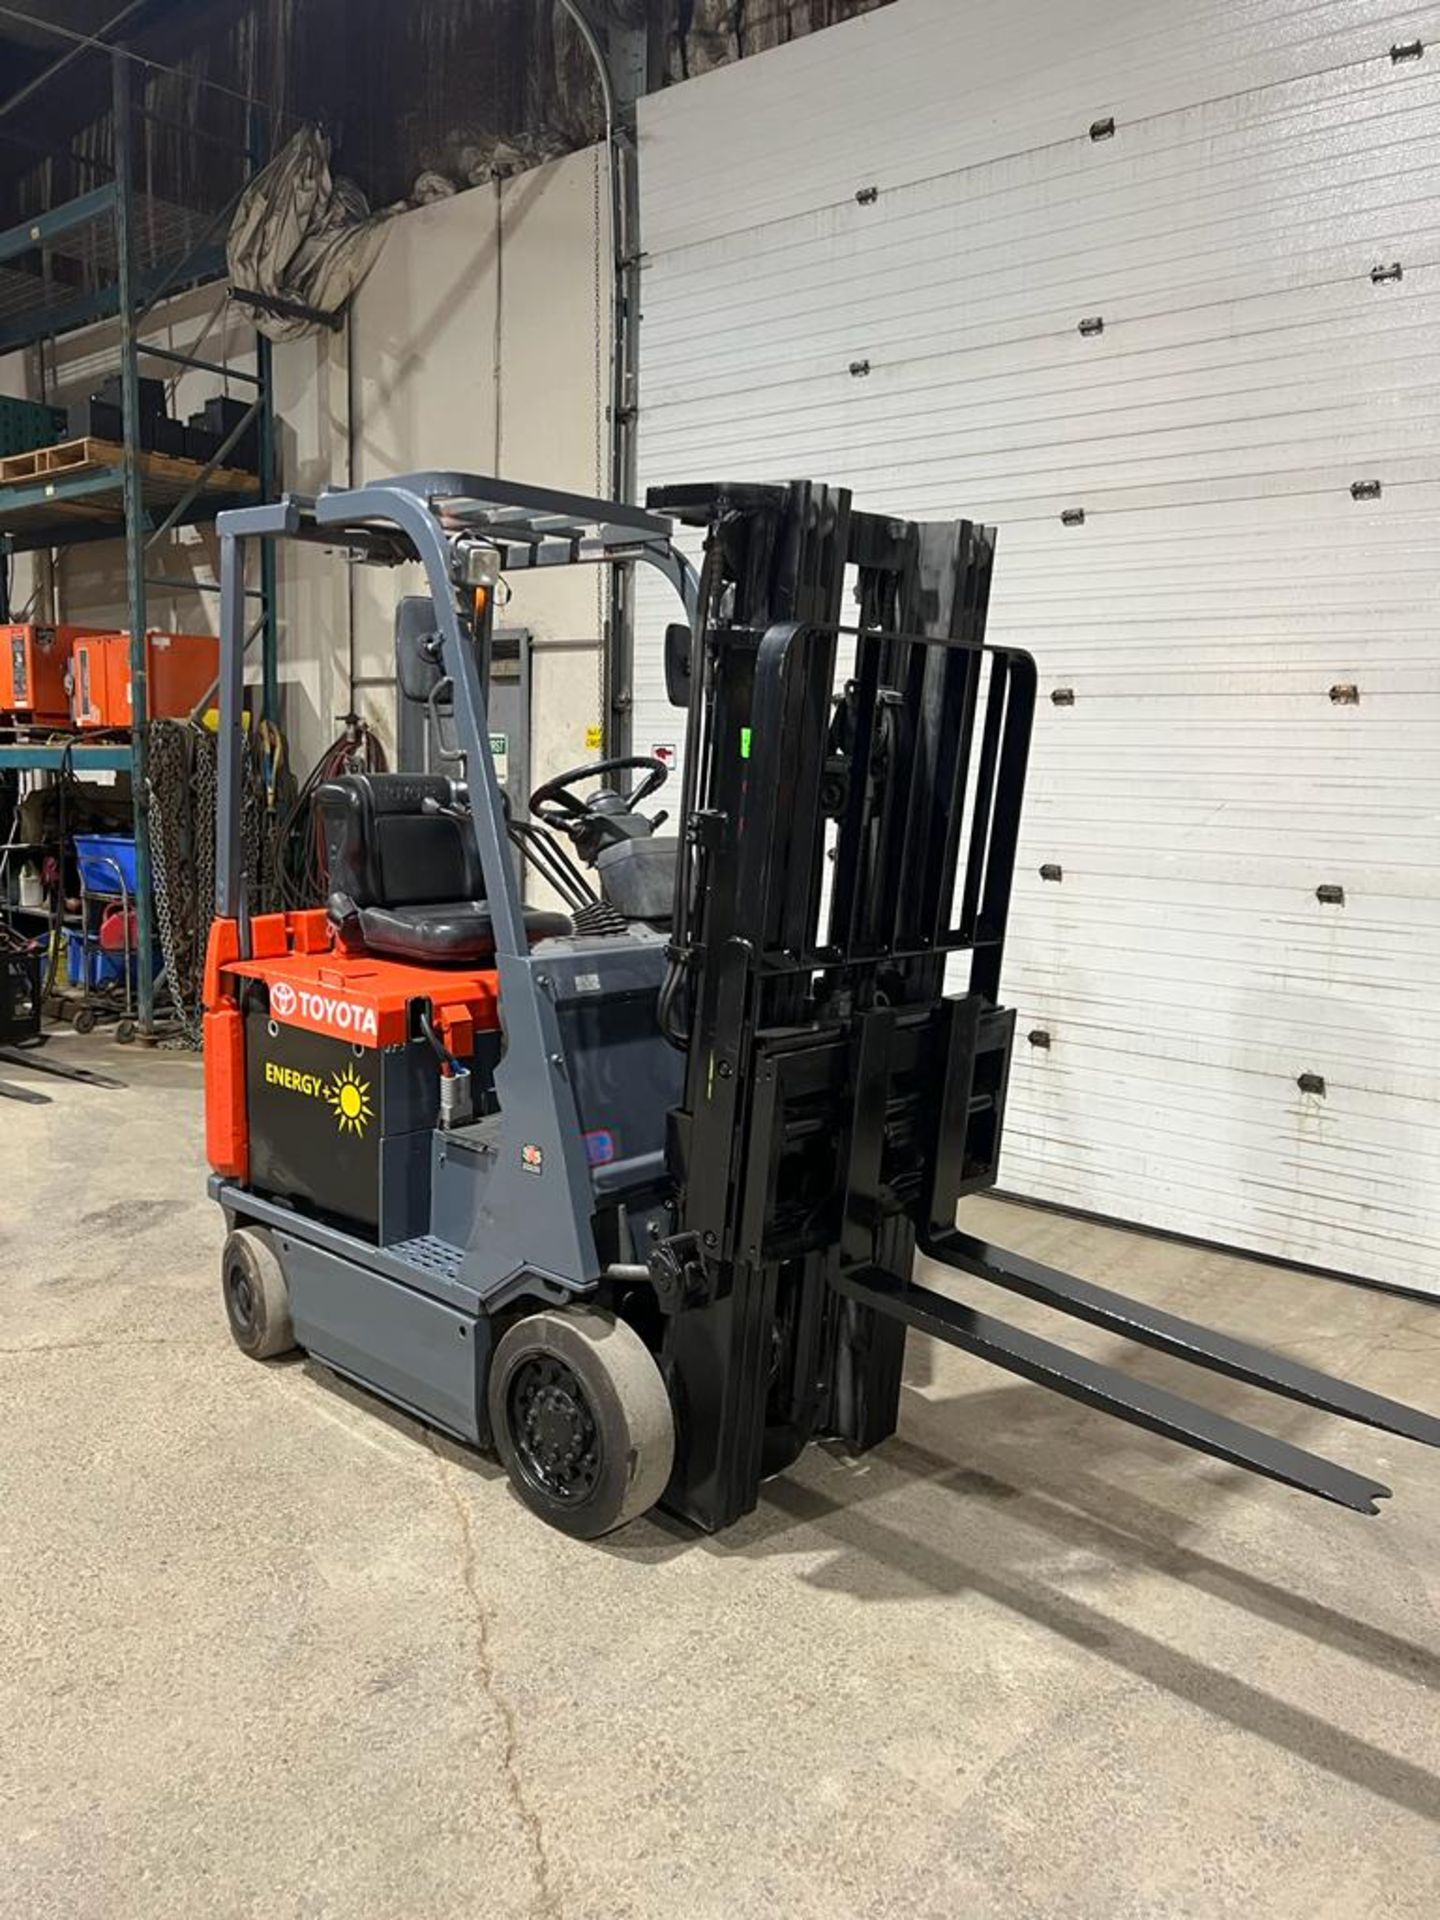 NICE Toyota 3,600lbs Capacity Forklift NEW 36V Battery with sideshift & 3-stage mast - FREE CUSTOMS - Image 4 of 4